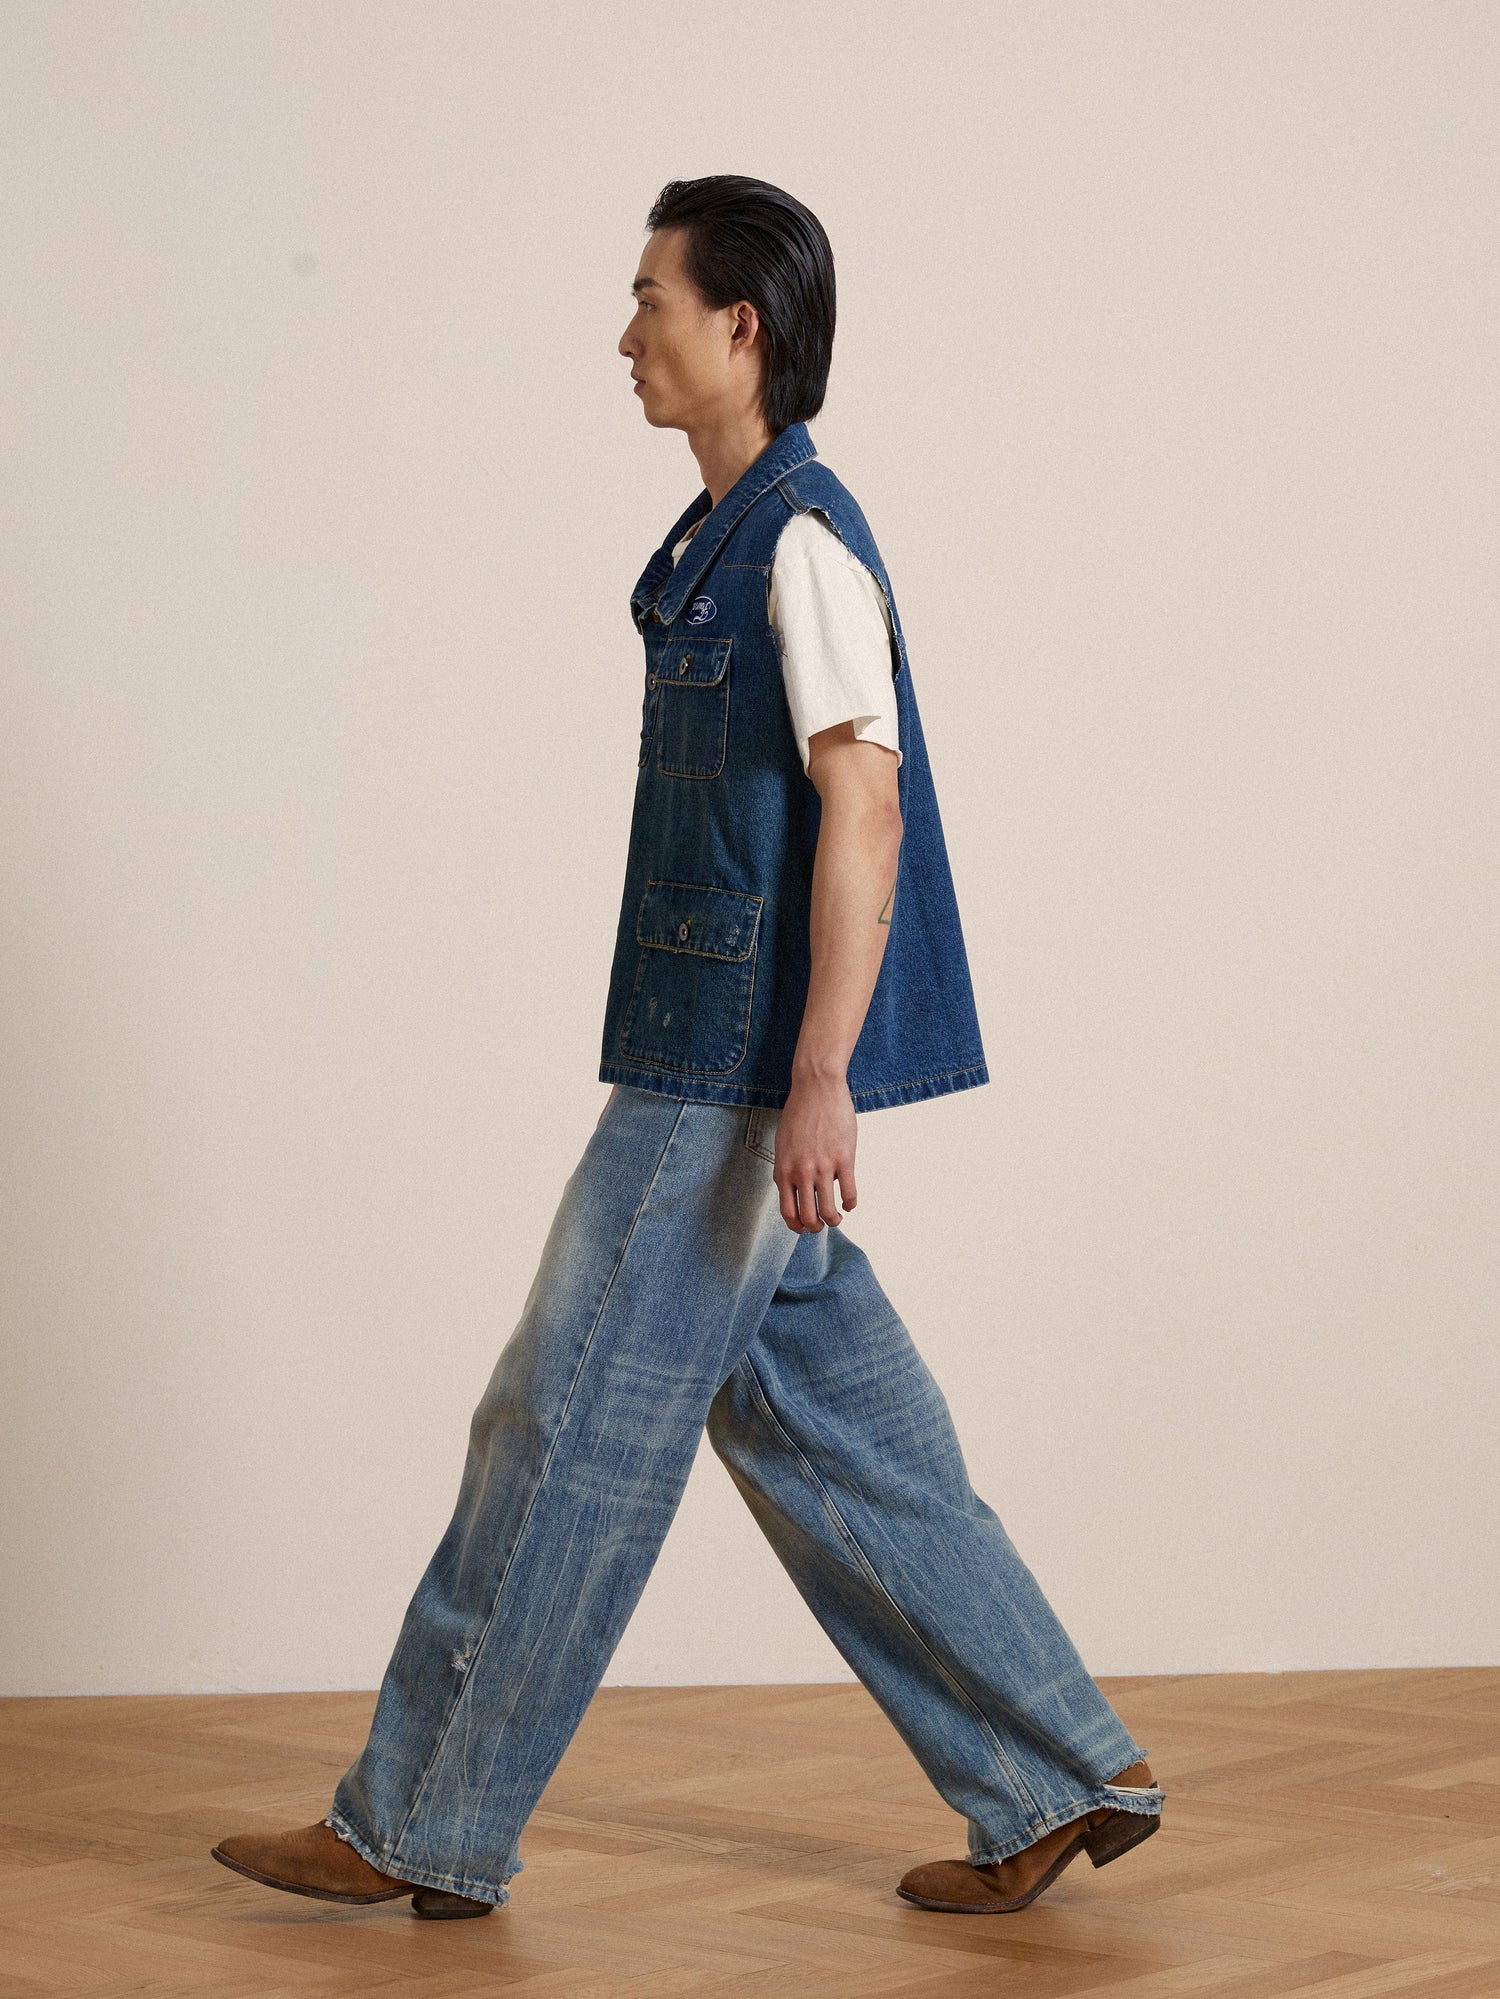 A man in a Found Raw Cut Patch Mechanic Denim vest adorned with embroidered patches walking on a wooden floor.